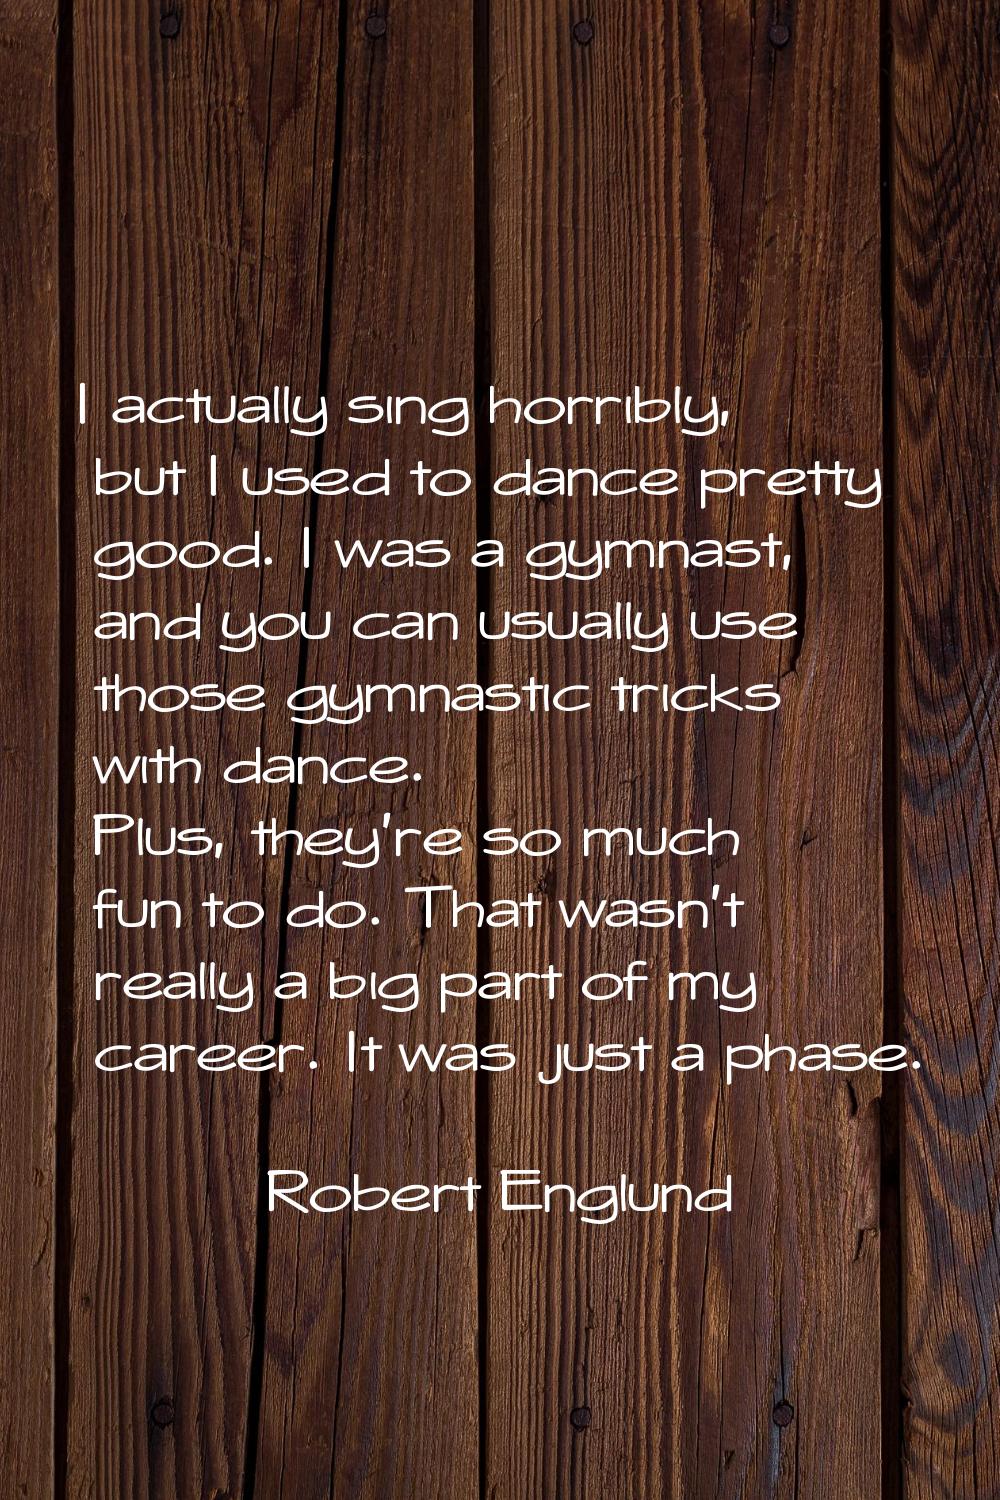 I actually sing horribly, but I used to dance pretty good. I was a gymnast, and you can usually use